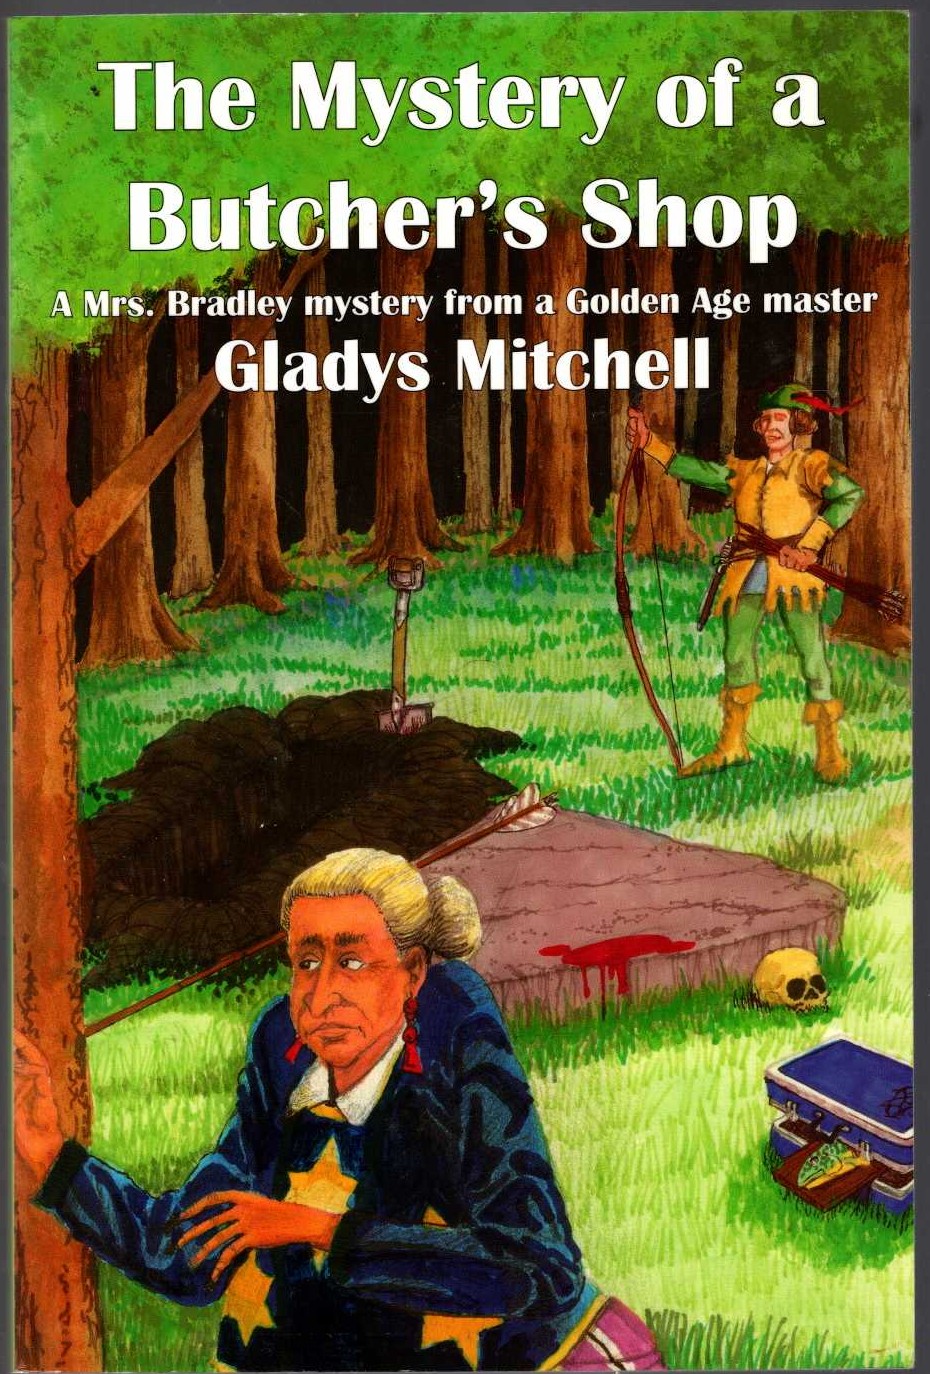 Gladys Mitchell  THE MYSTERY OF A BUTCHER'S SHOP front book cover image